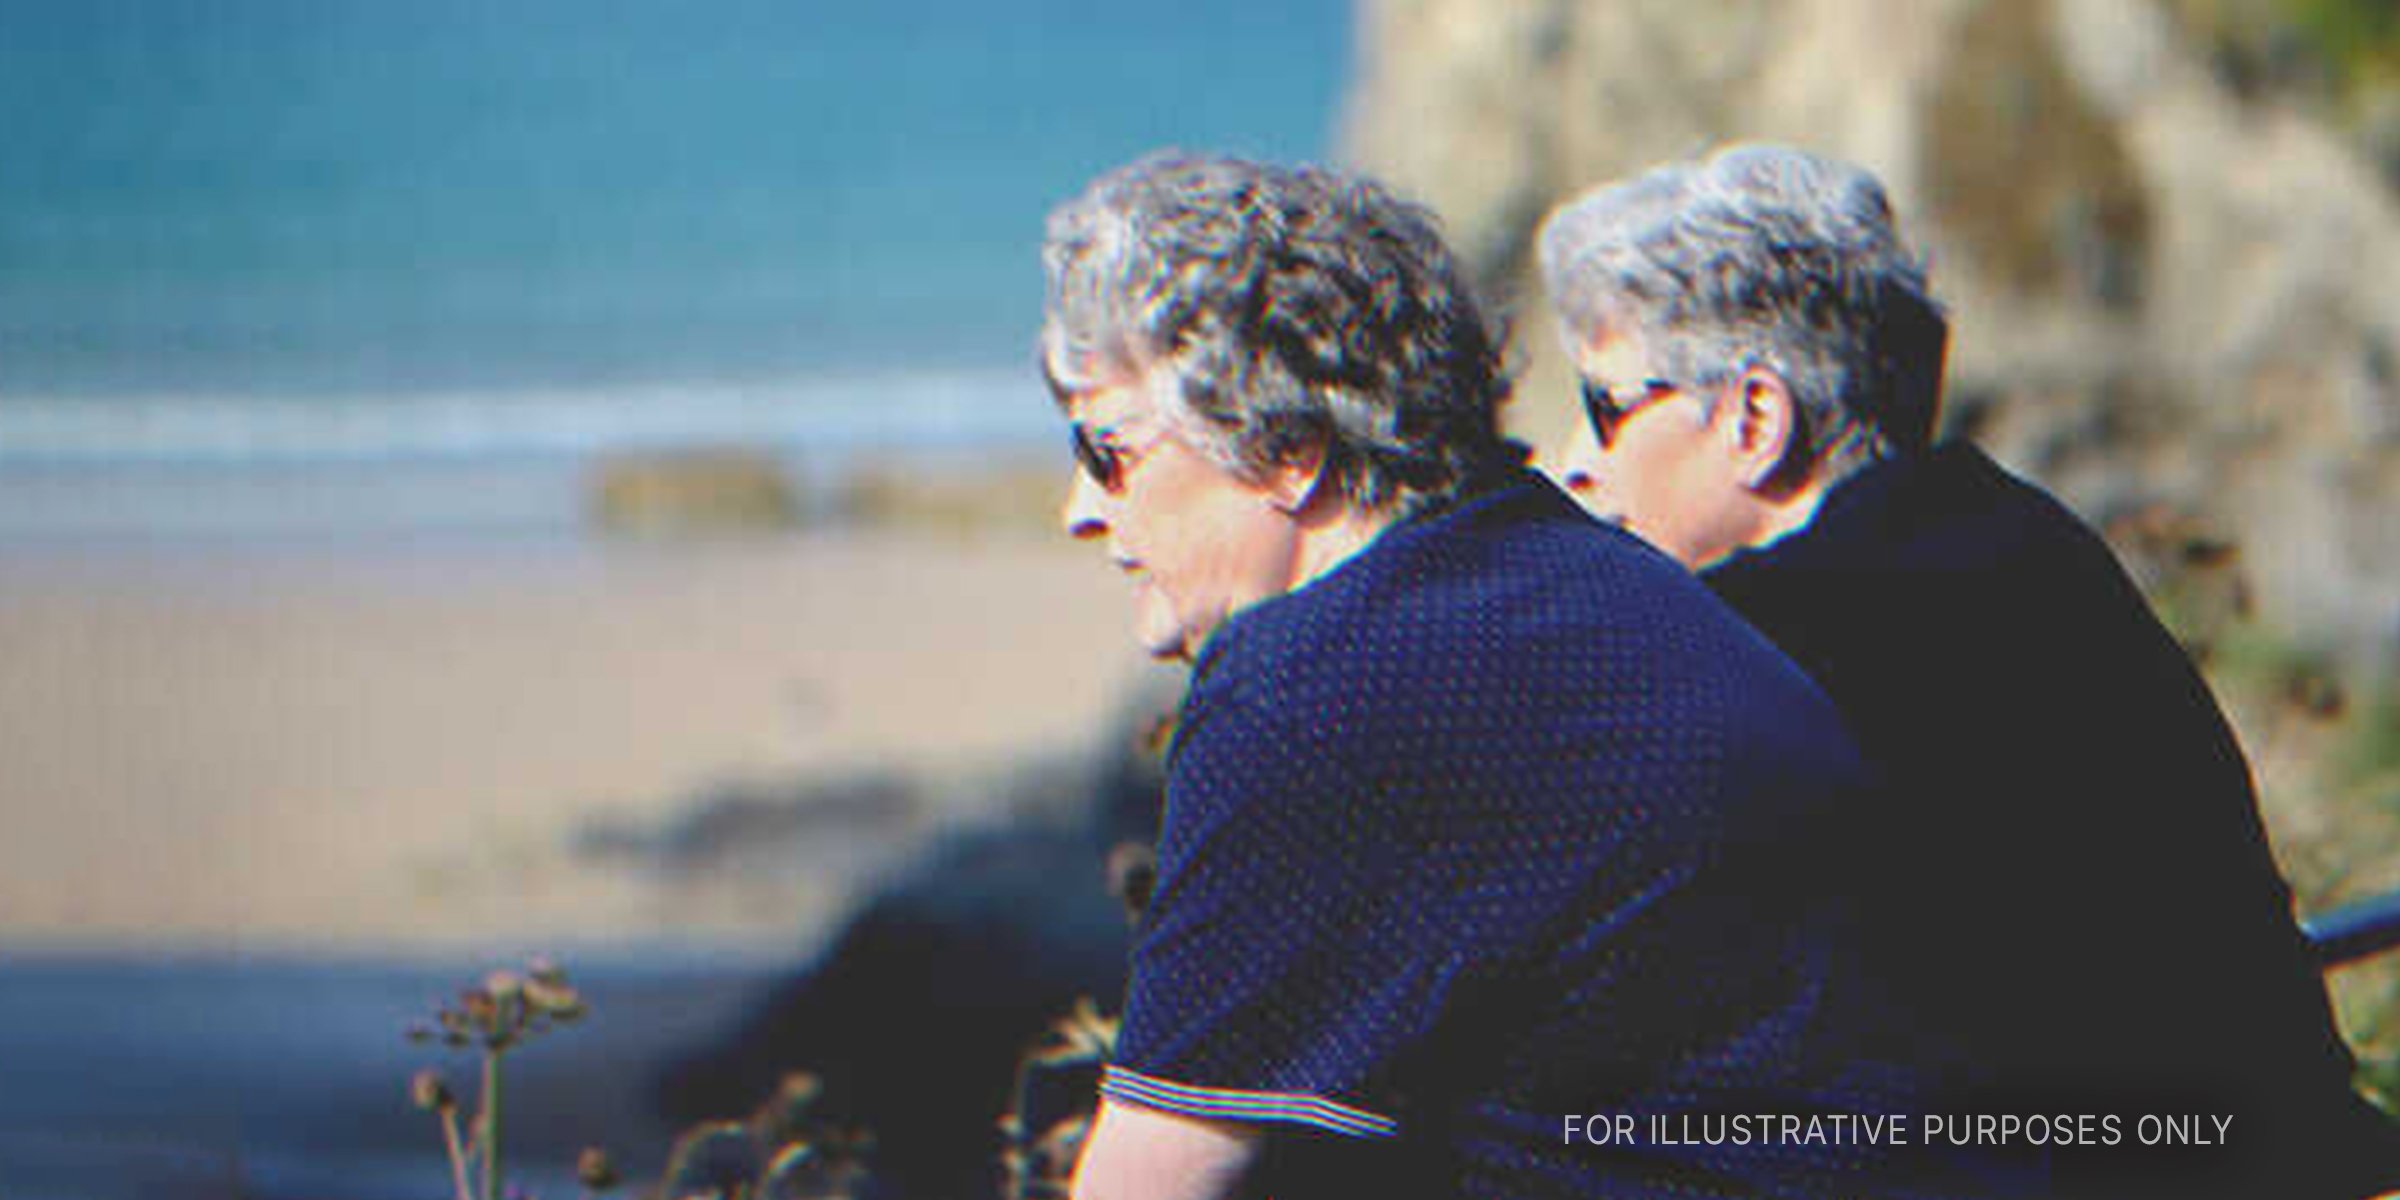 Twins Sister Gazing At Sea. | Source: Shutterstock